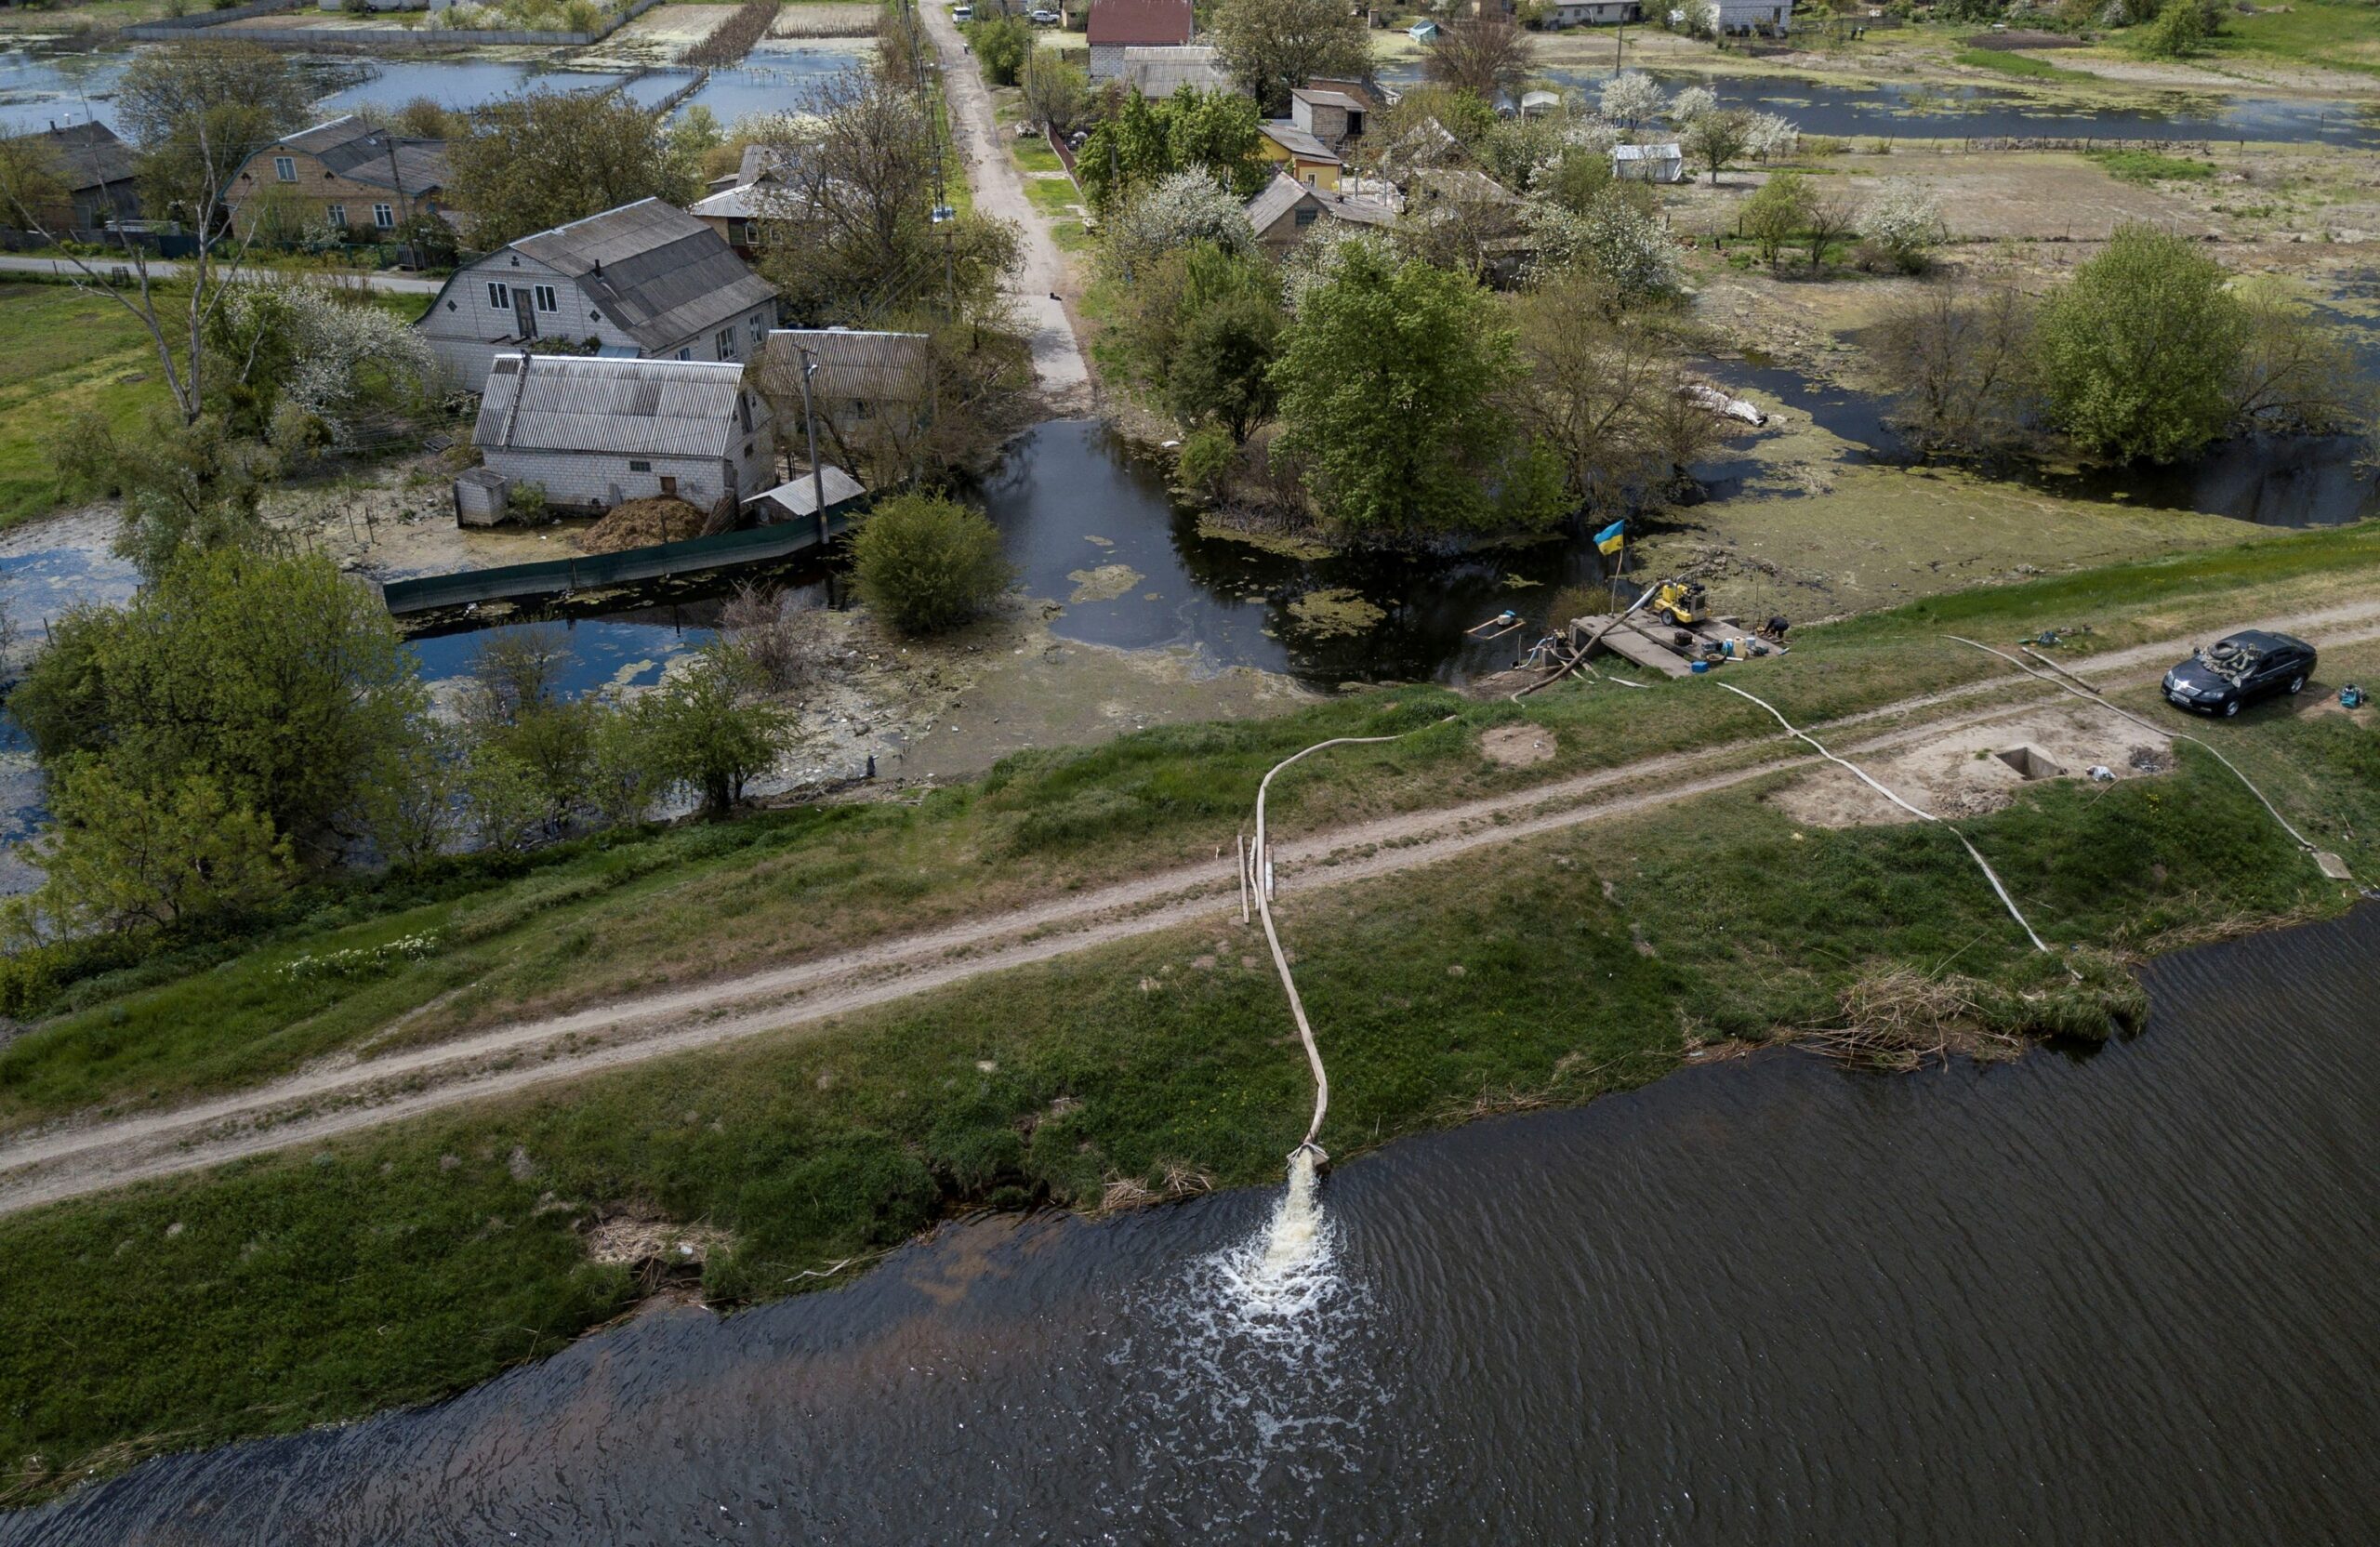 How intentional flooding saved Ukrainian village from Russian occupation